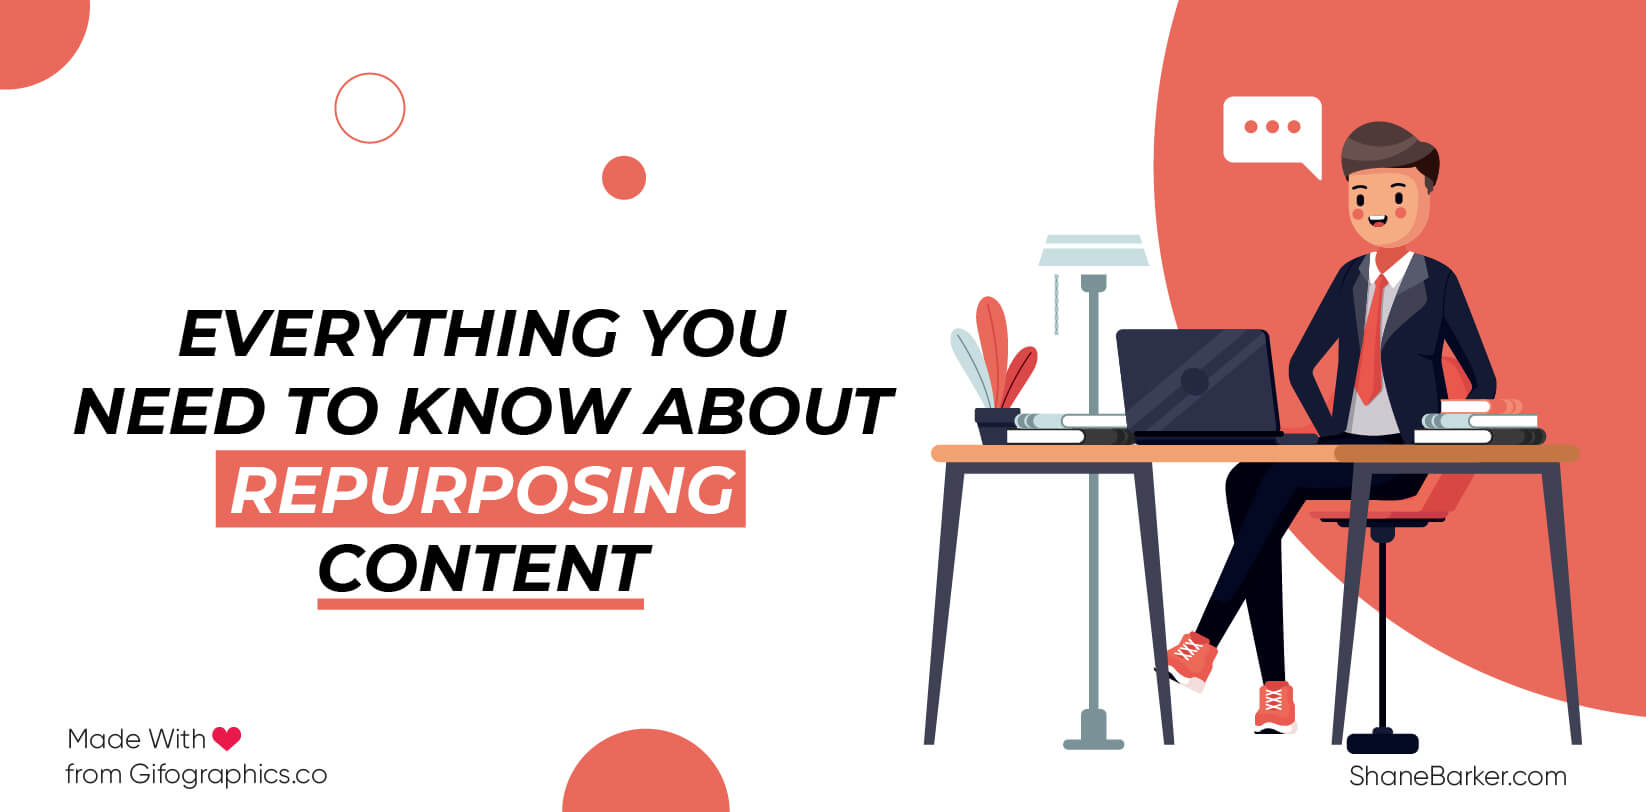 Everything You Need to Know About Repurposing Content (Updated October 2019)